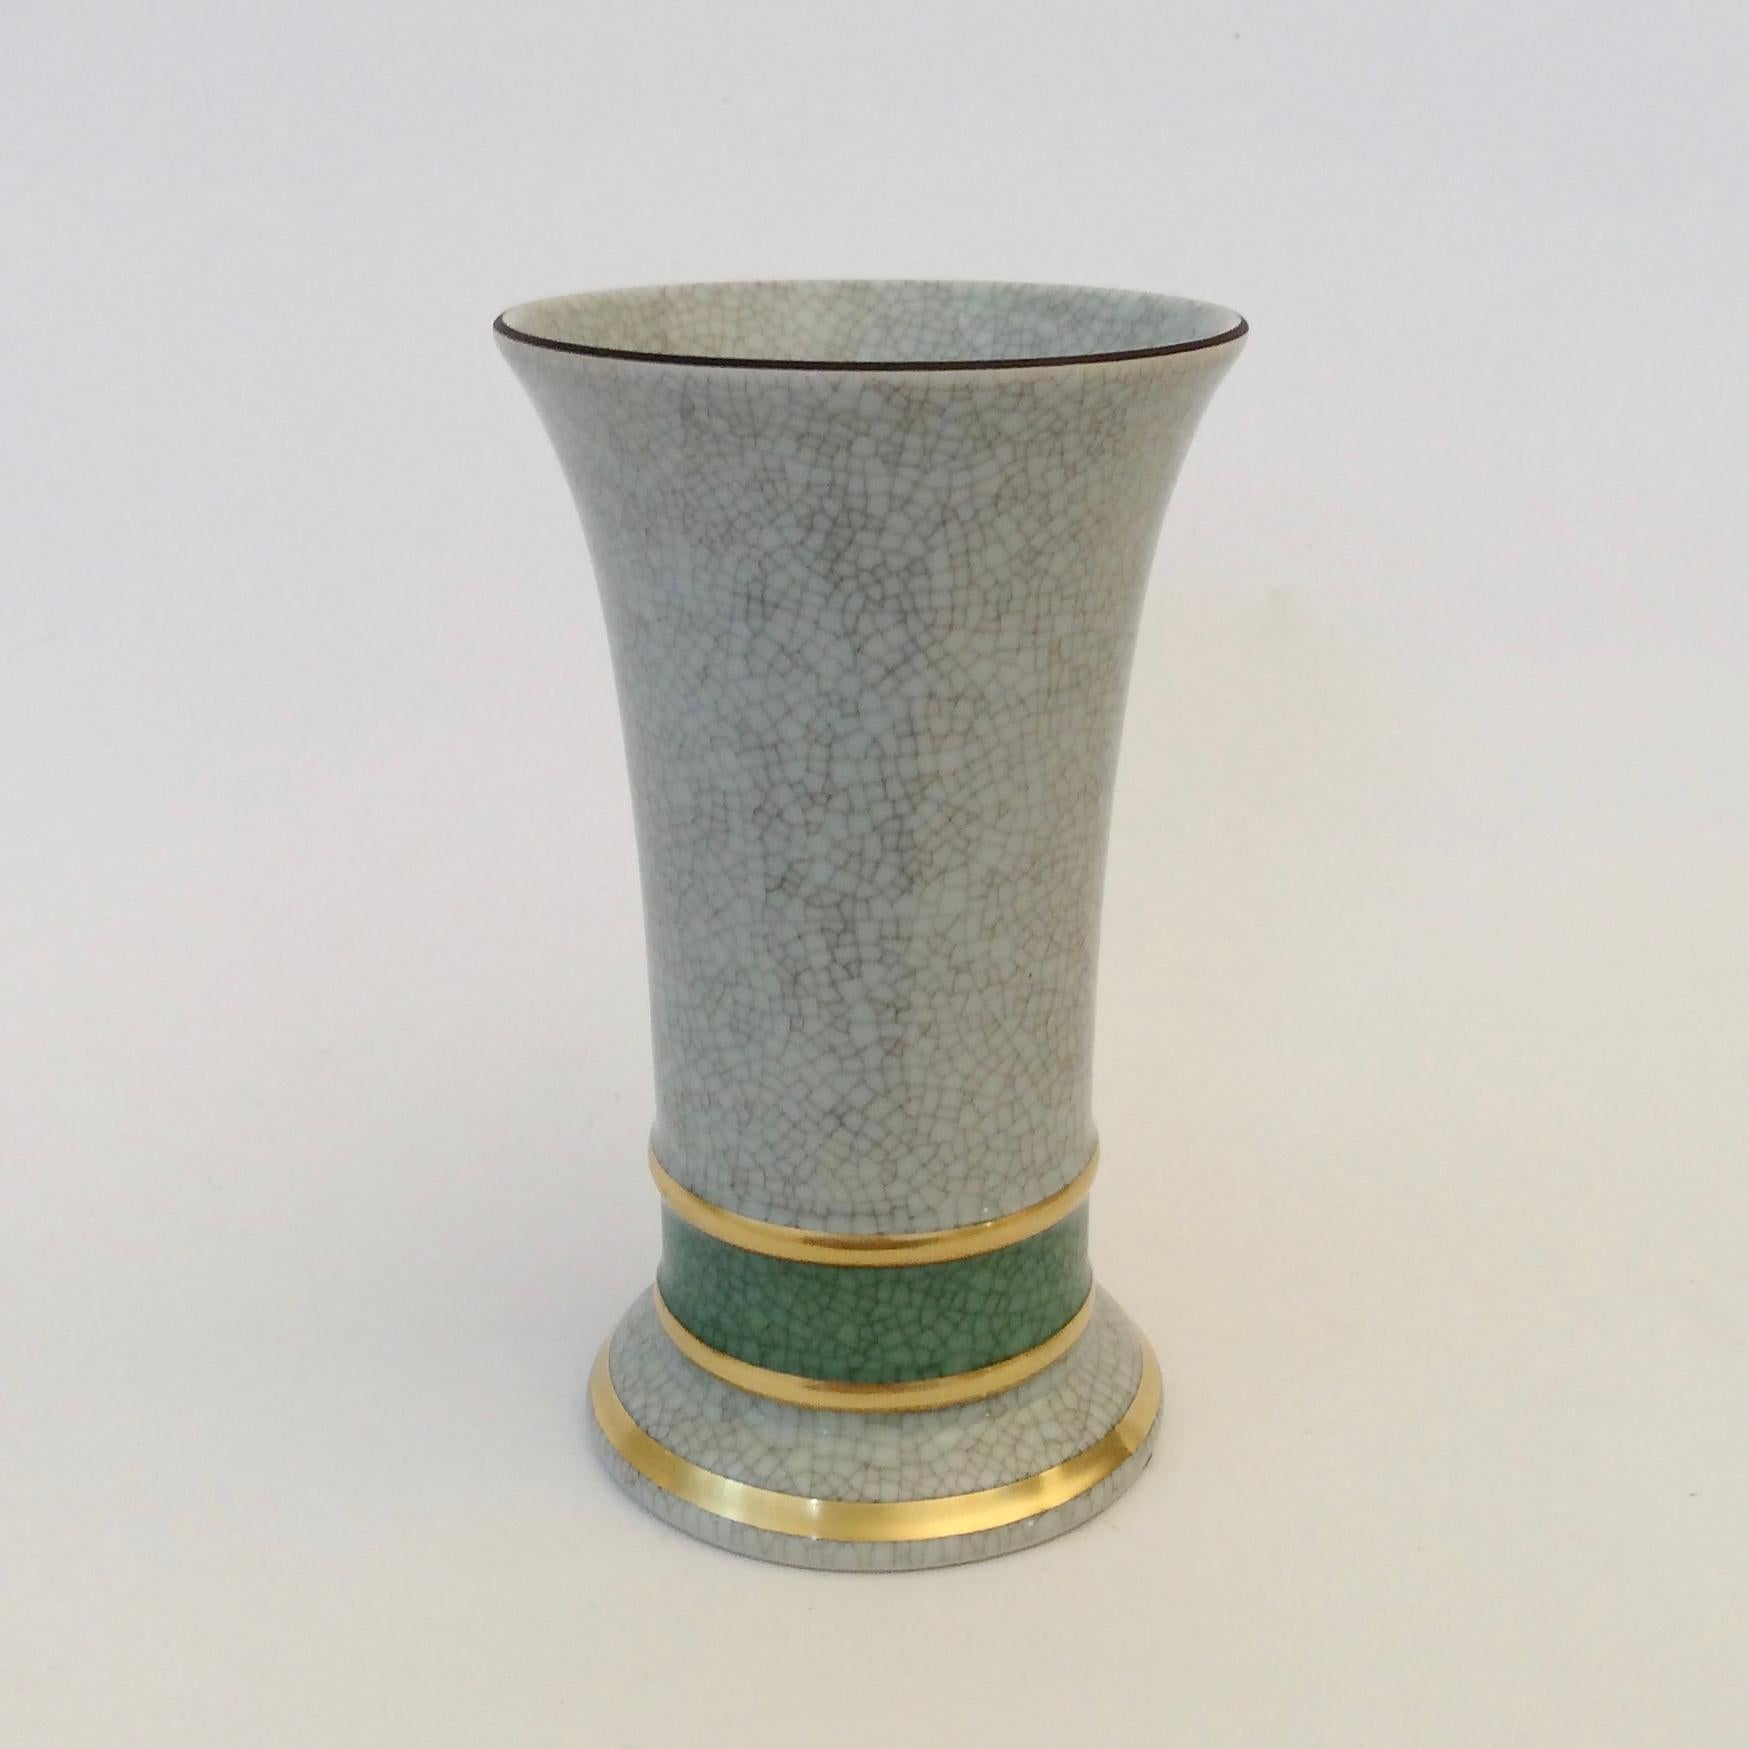 Royal Copenhagen vase, circa 1950, Denmark.
Light blue grey crackle glaze porcelain with green and gold details.
Stamped and numbered underneath.
Dimensions: 14 cm Height, 9 cm diameter.
All purchases are covered by our Buyer Protection